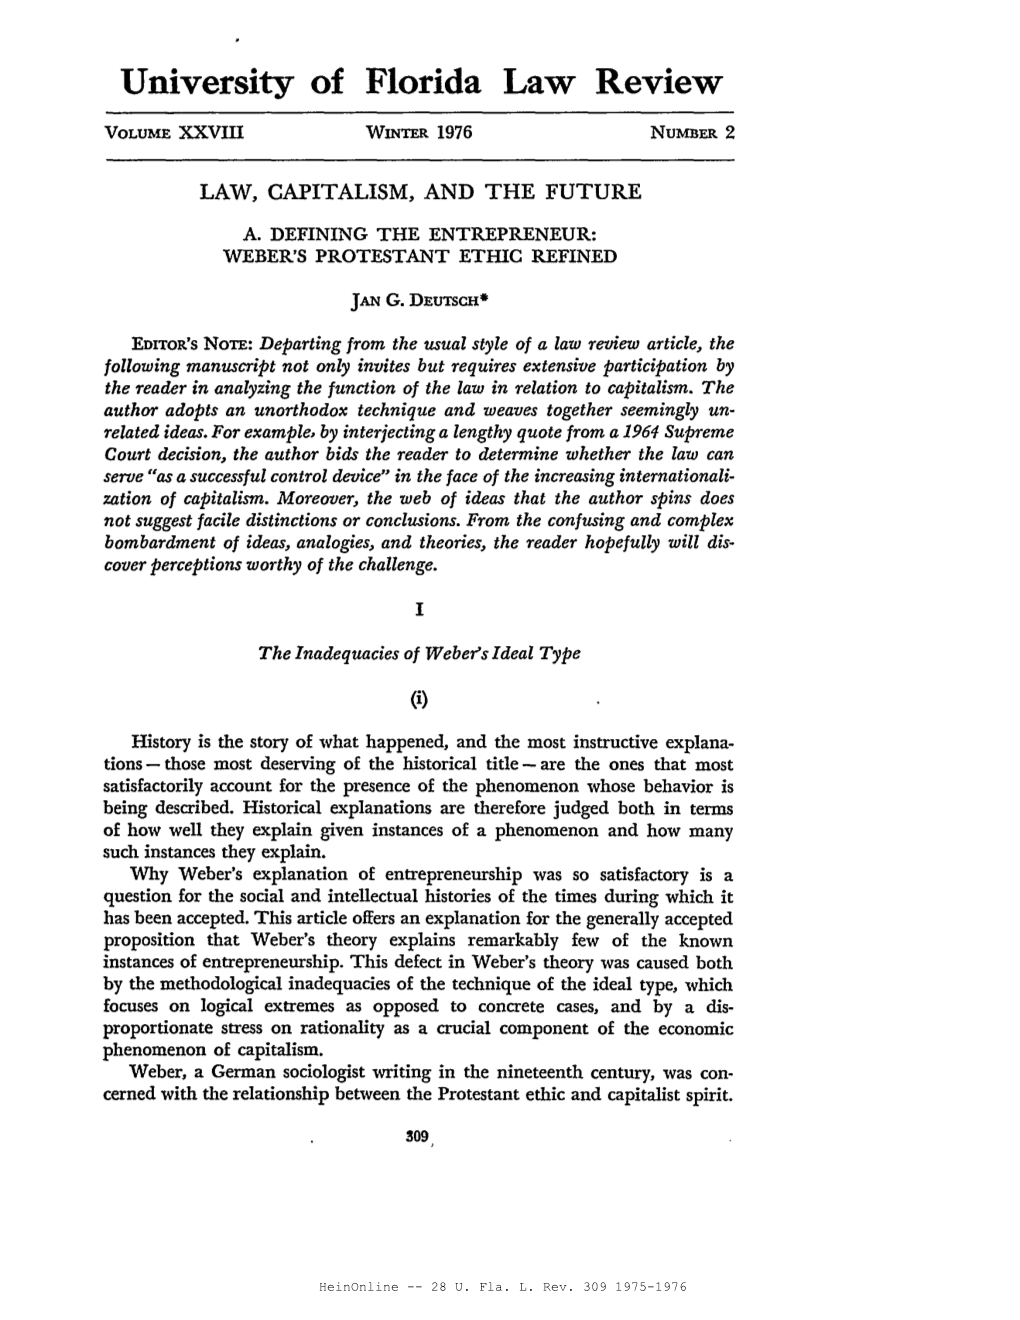 Law, Capitalism, and the Future